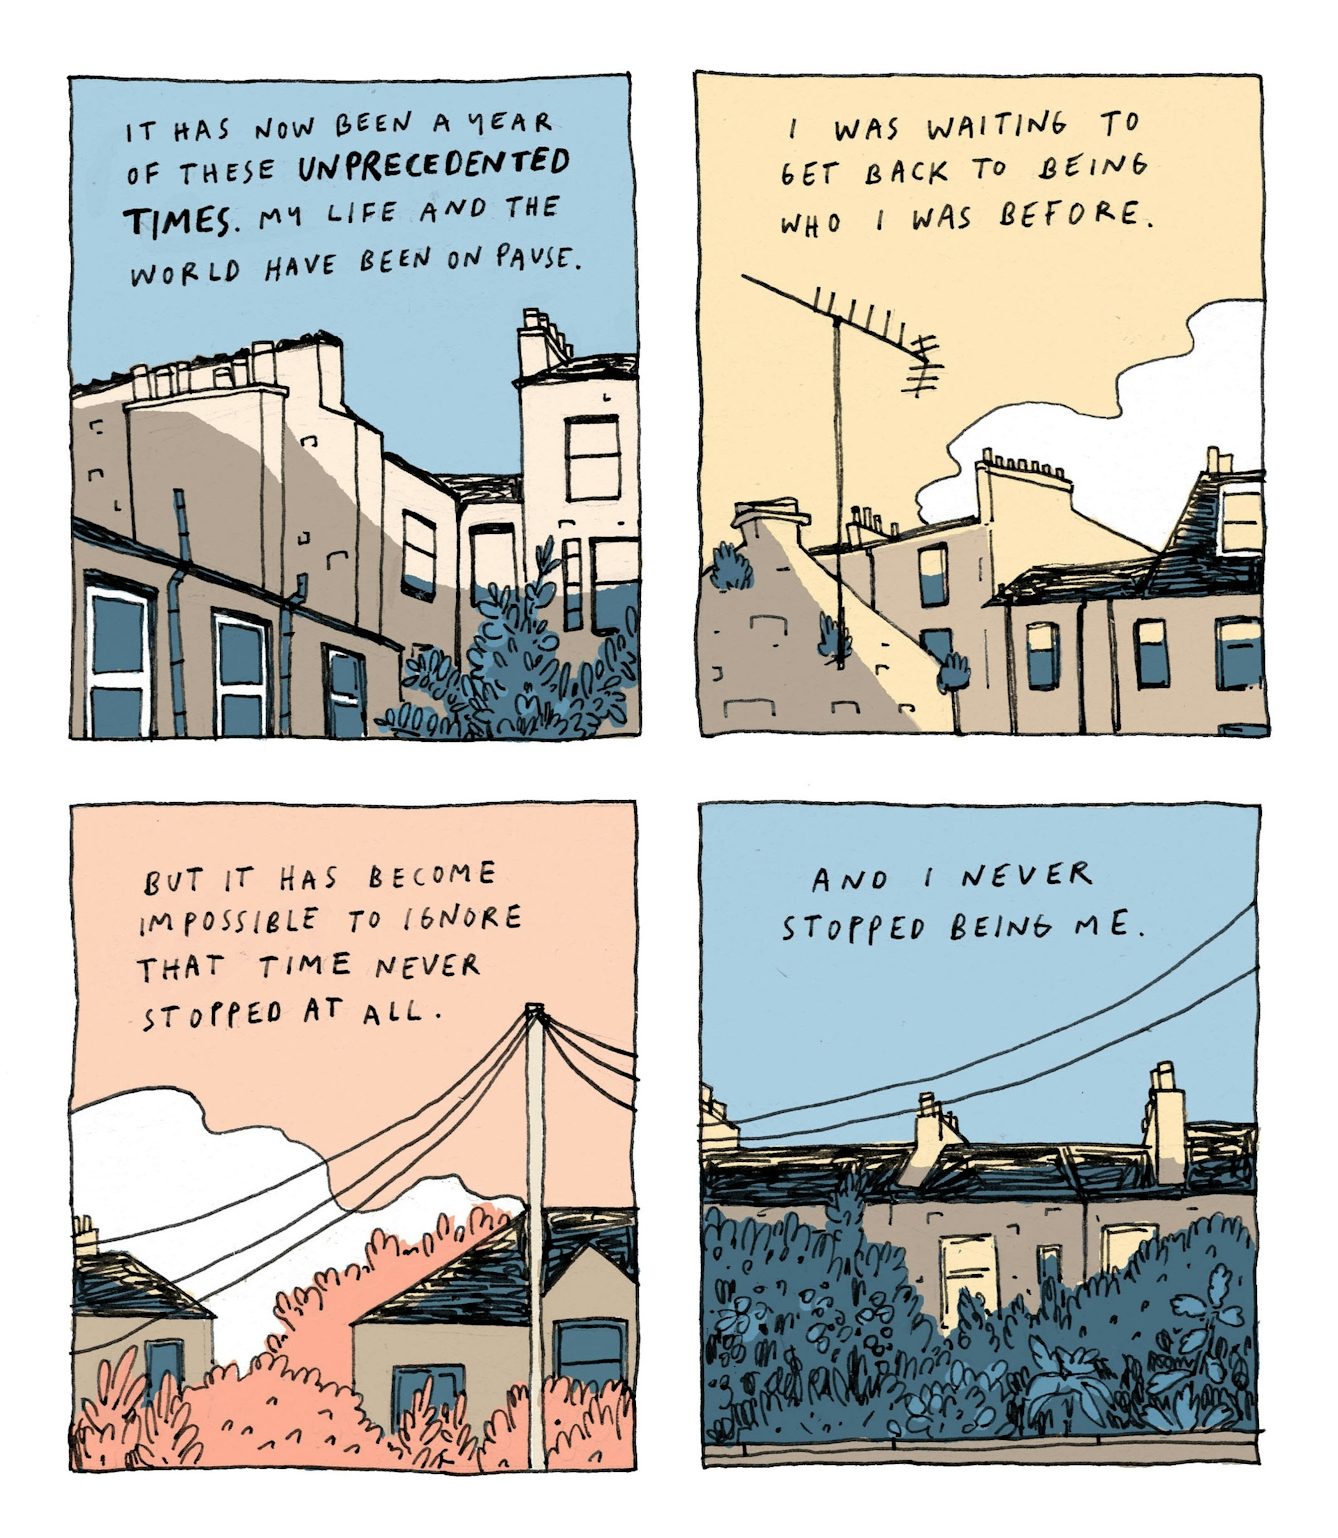 A four panel comic, each panel depicting a view of the Edinburgh skyline at different times of day. Handwritten text sits in the sky over the rooftops and clouds.
First panel: It has now been a year of these 'unprecedented times'. My life and the world have been on pause.
Second panel: I was waiting to get back to being who I was before.
Third panel: But it has become impossible to ignore that time never stopped at all.
Fourth panel: And I never stopped being me.